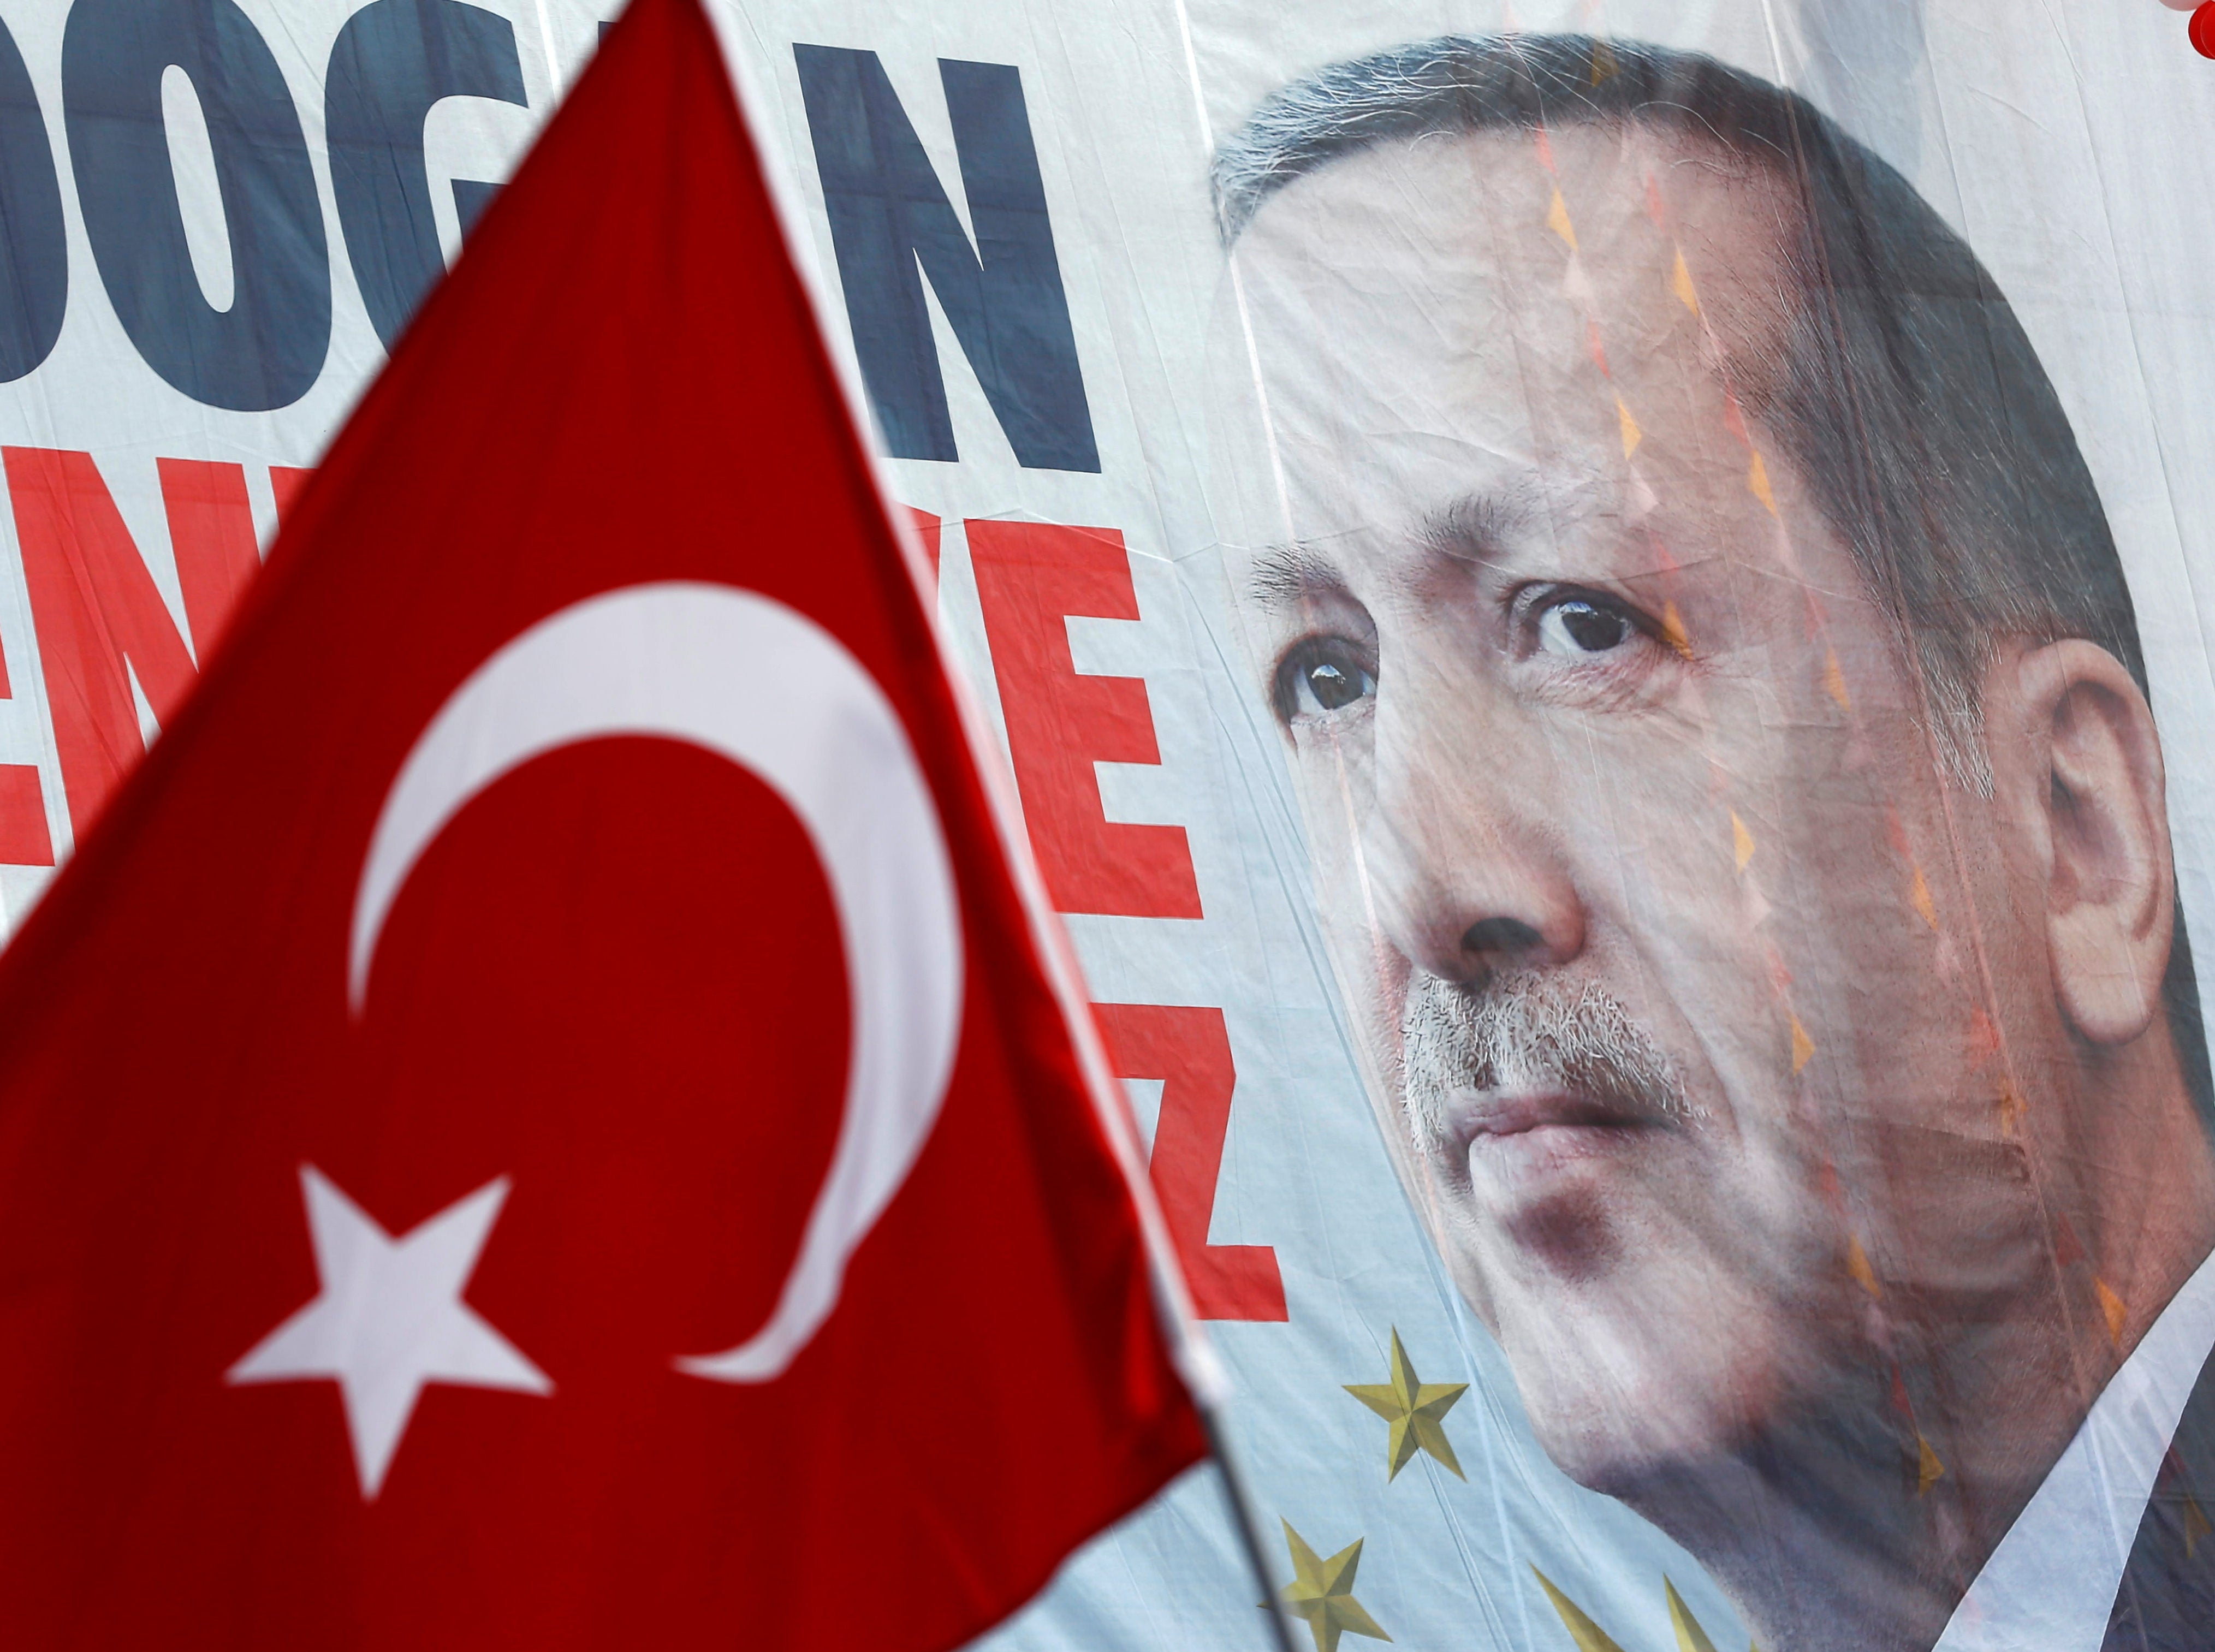 UK media urged to join campaign to free more than 150 journalists jailed in Turkey